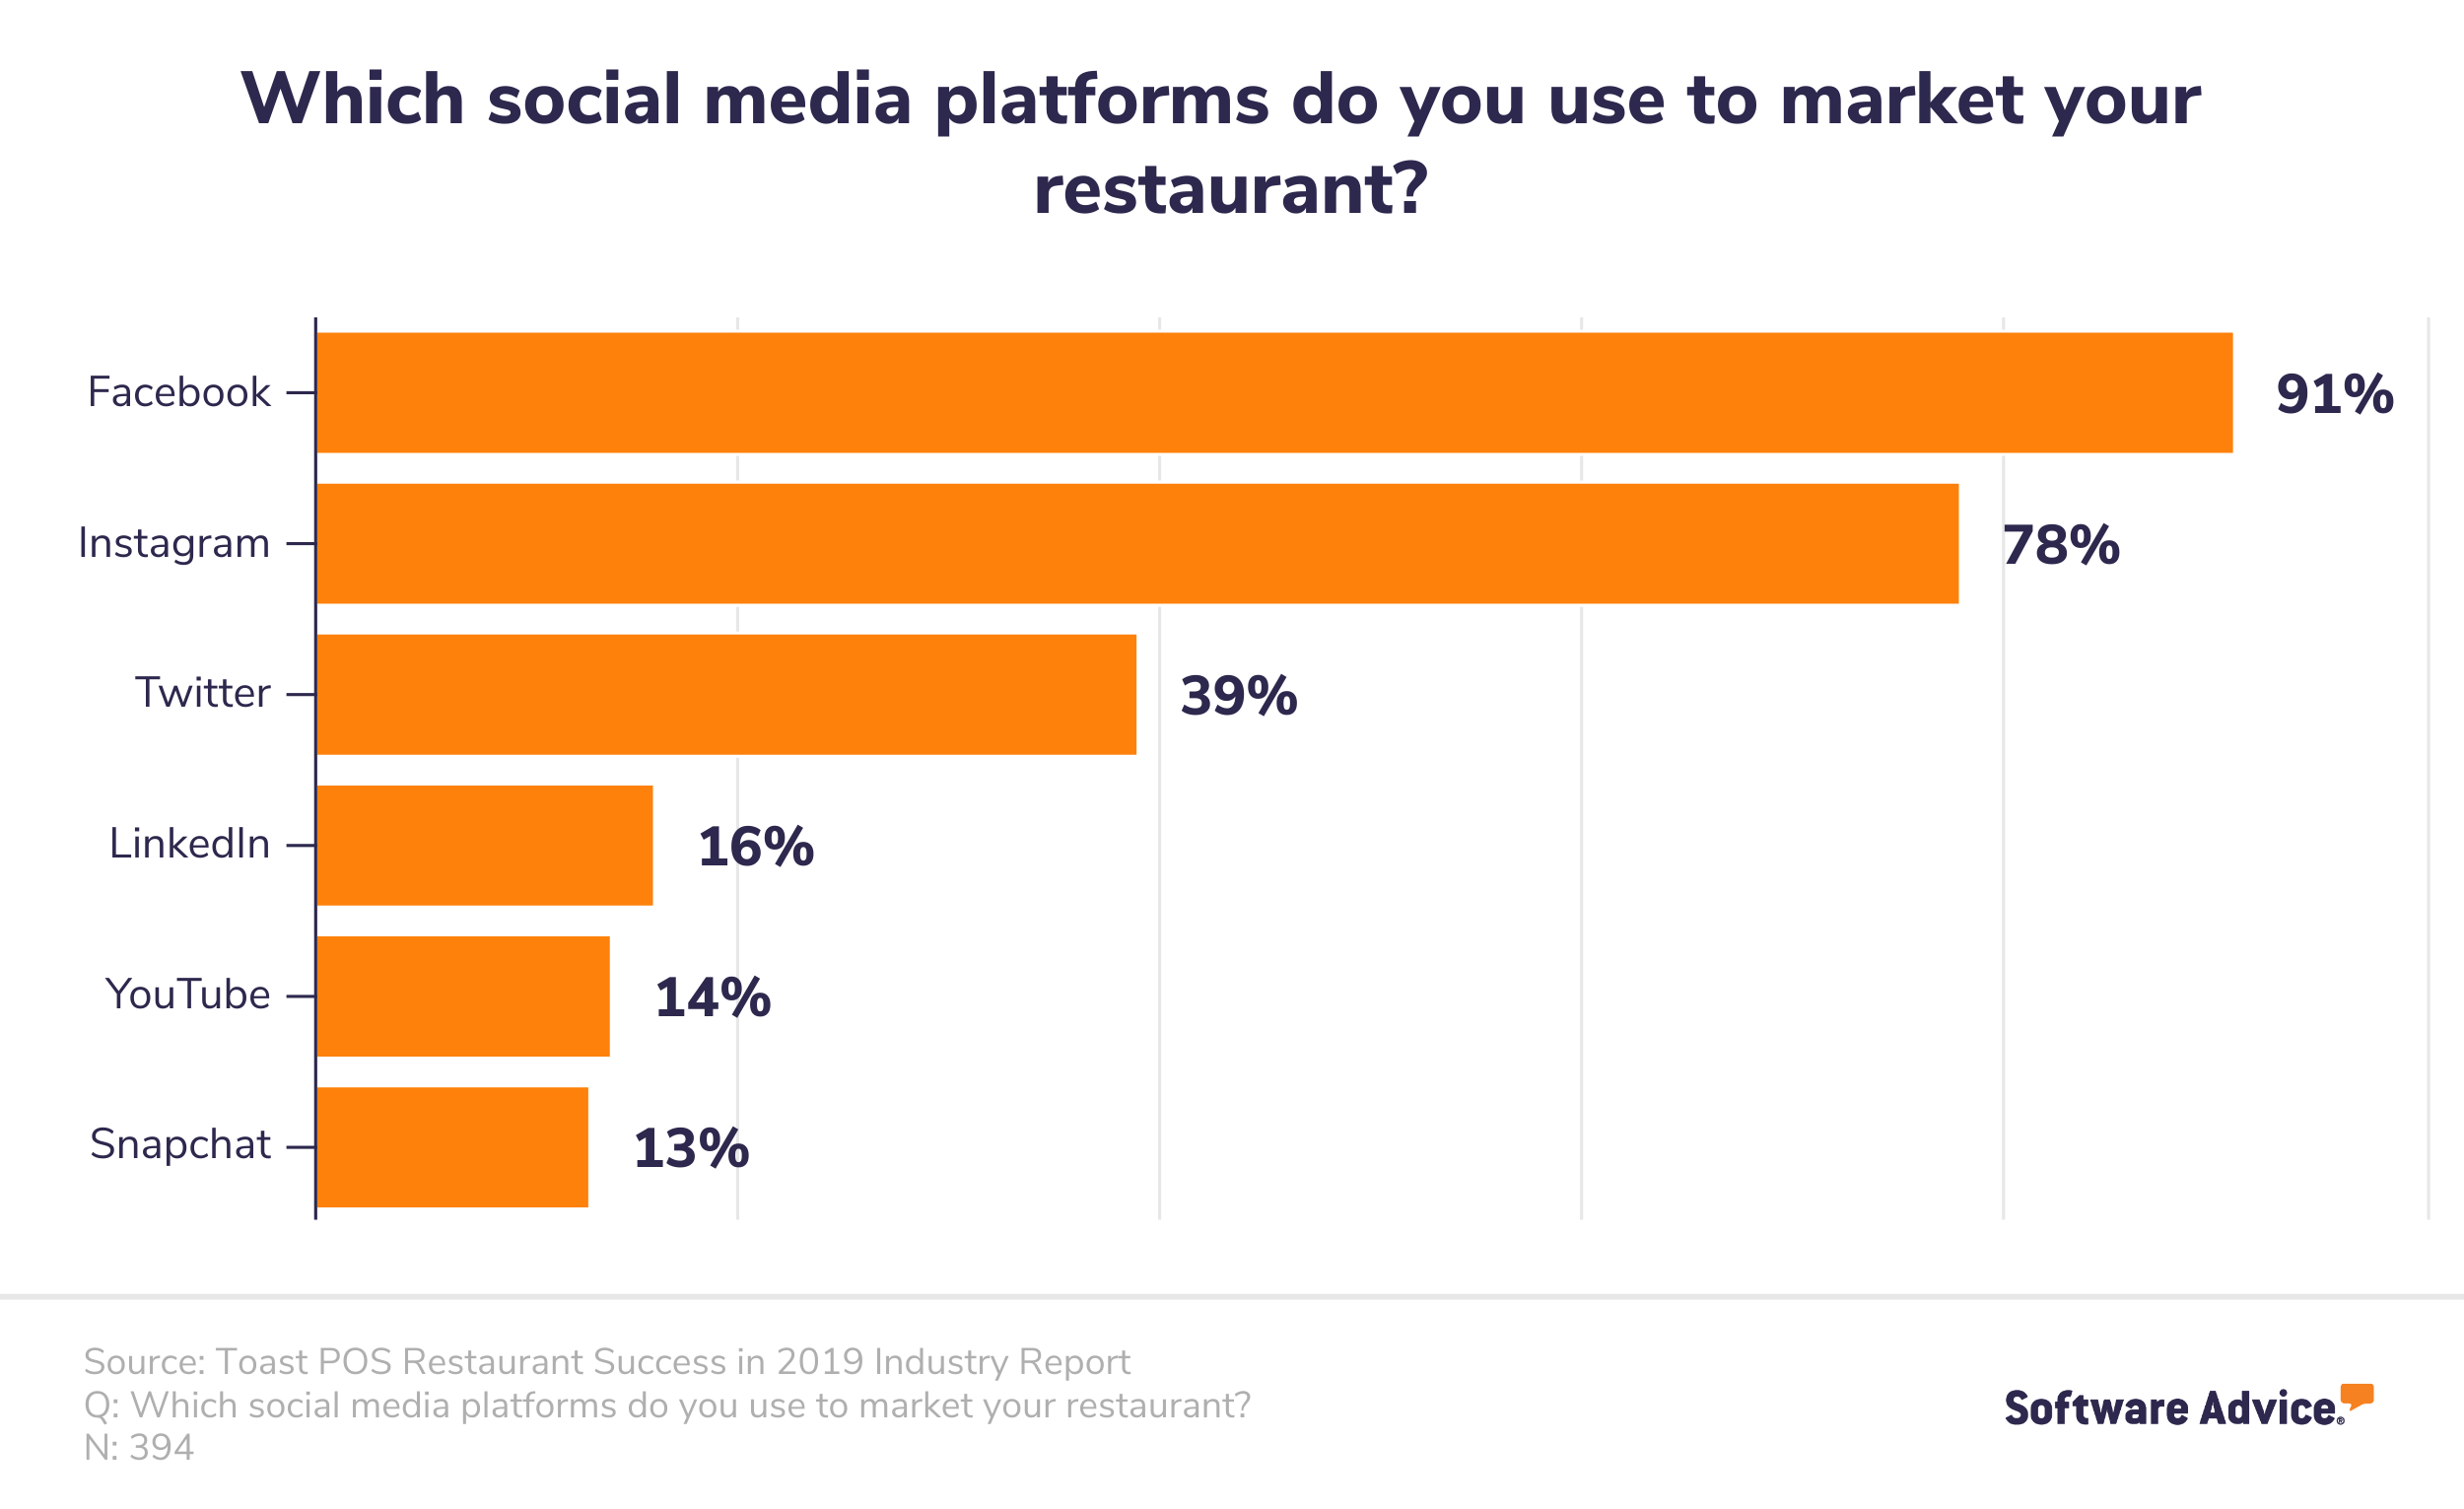 A-horizontal-bar-chart-showing-which-social-media-platforms-restaurateurs-use-to-market-their-restaurants:-Facebook-91%,-Instagram-78%,-Twitter-39%,-LinkedIn-16%,-YouTube-14%,-Snapchat-13%